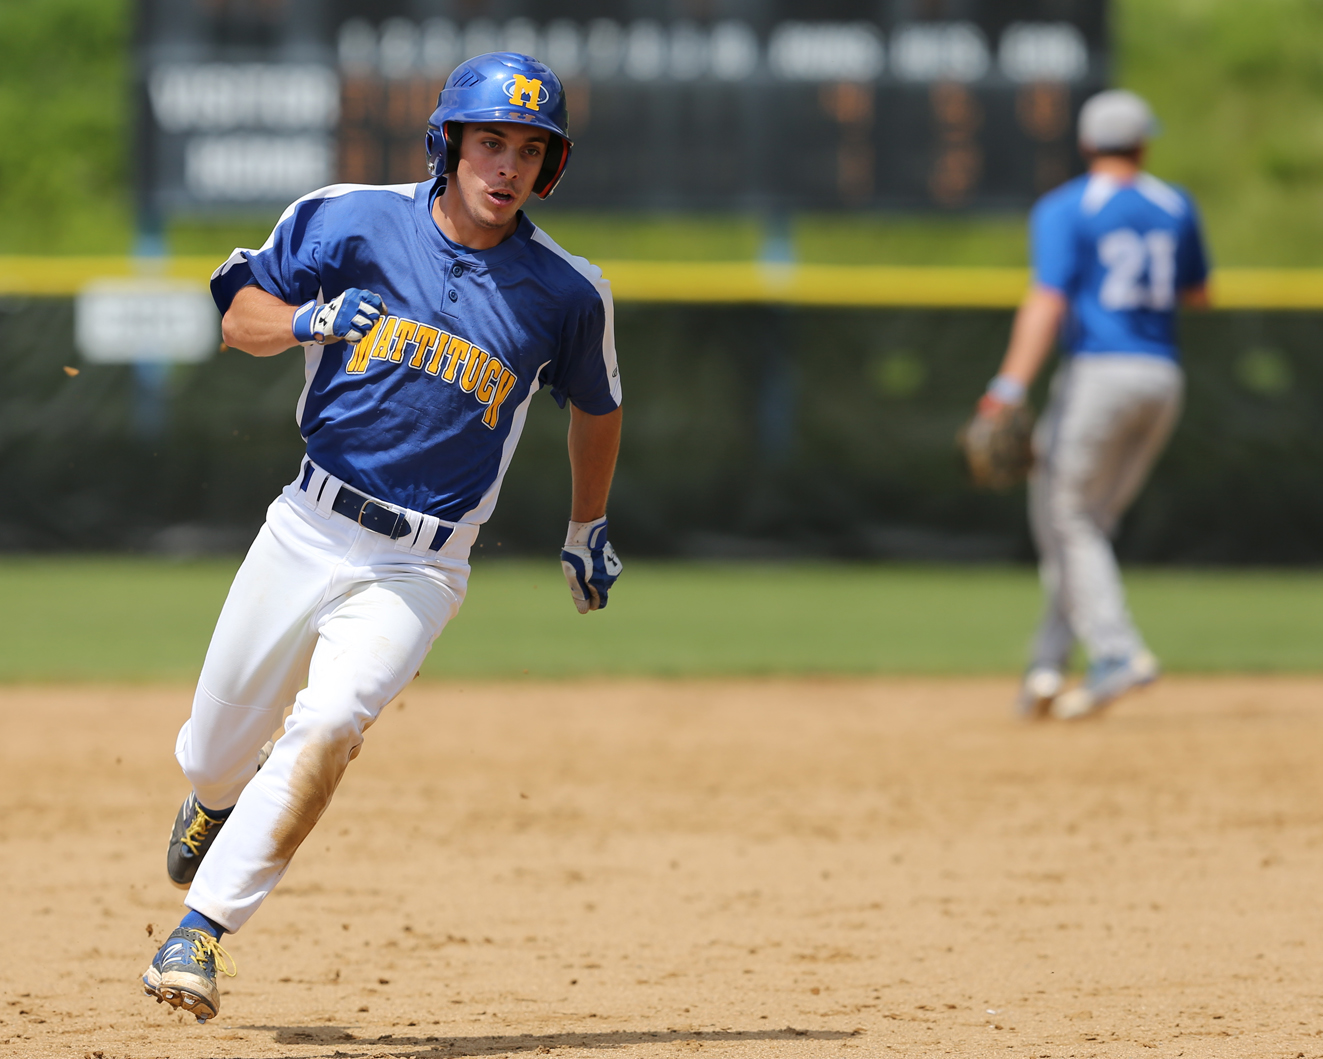 Joe Tardif heads to third on his way home in the 6th inning in semifinals Saturday morning. (Credit: Daniel De Mato)